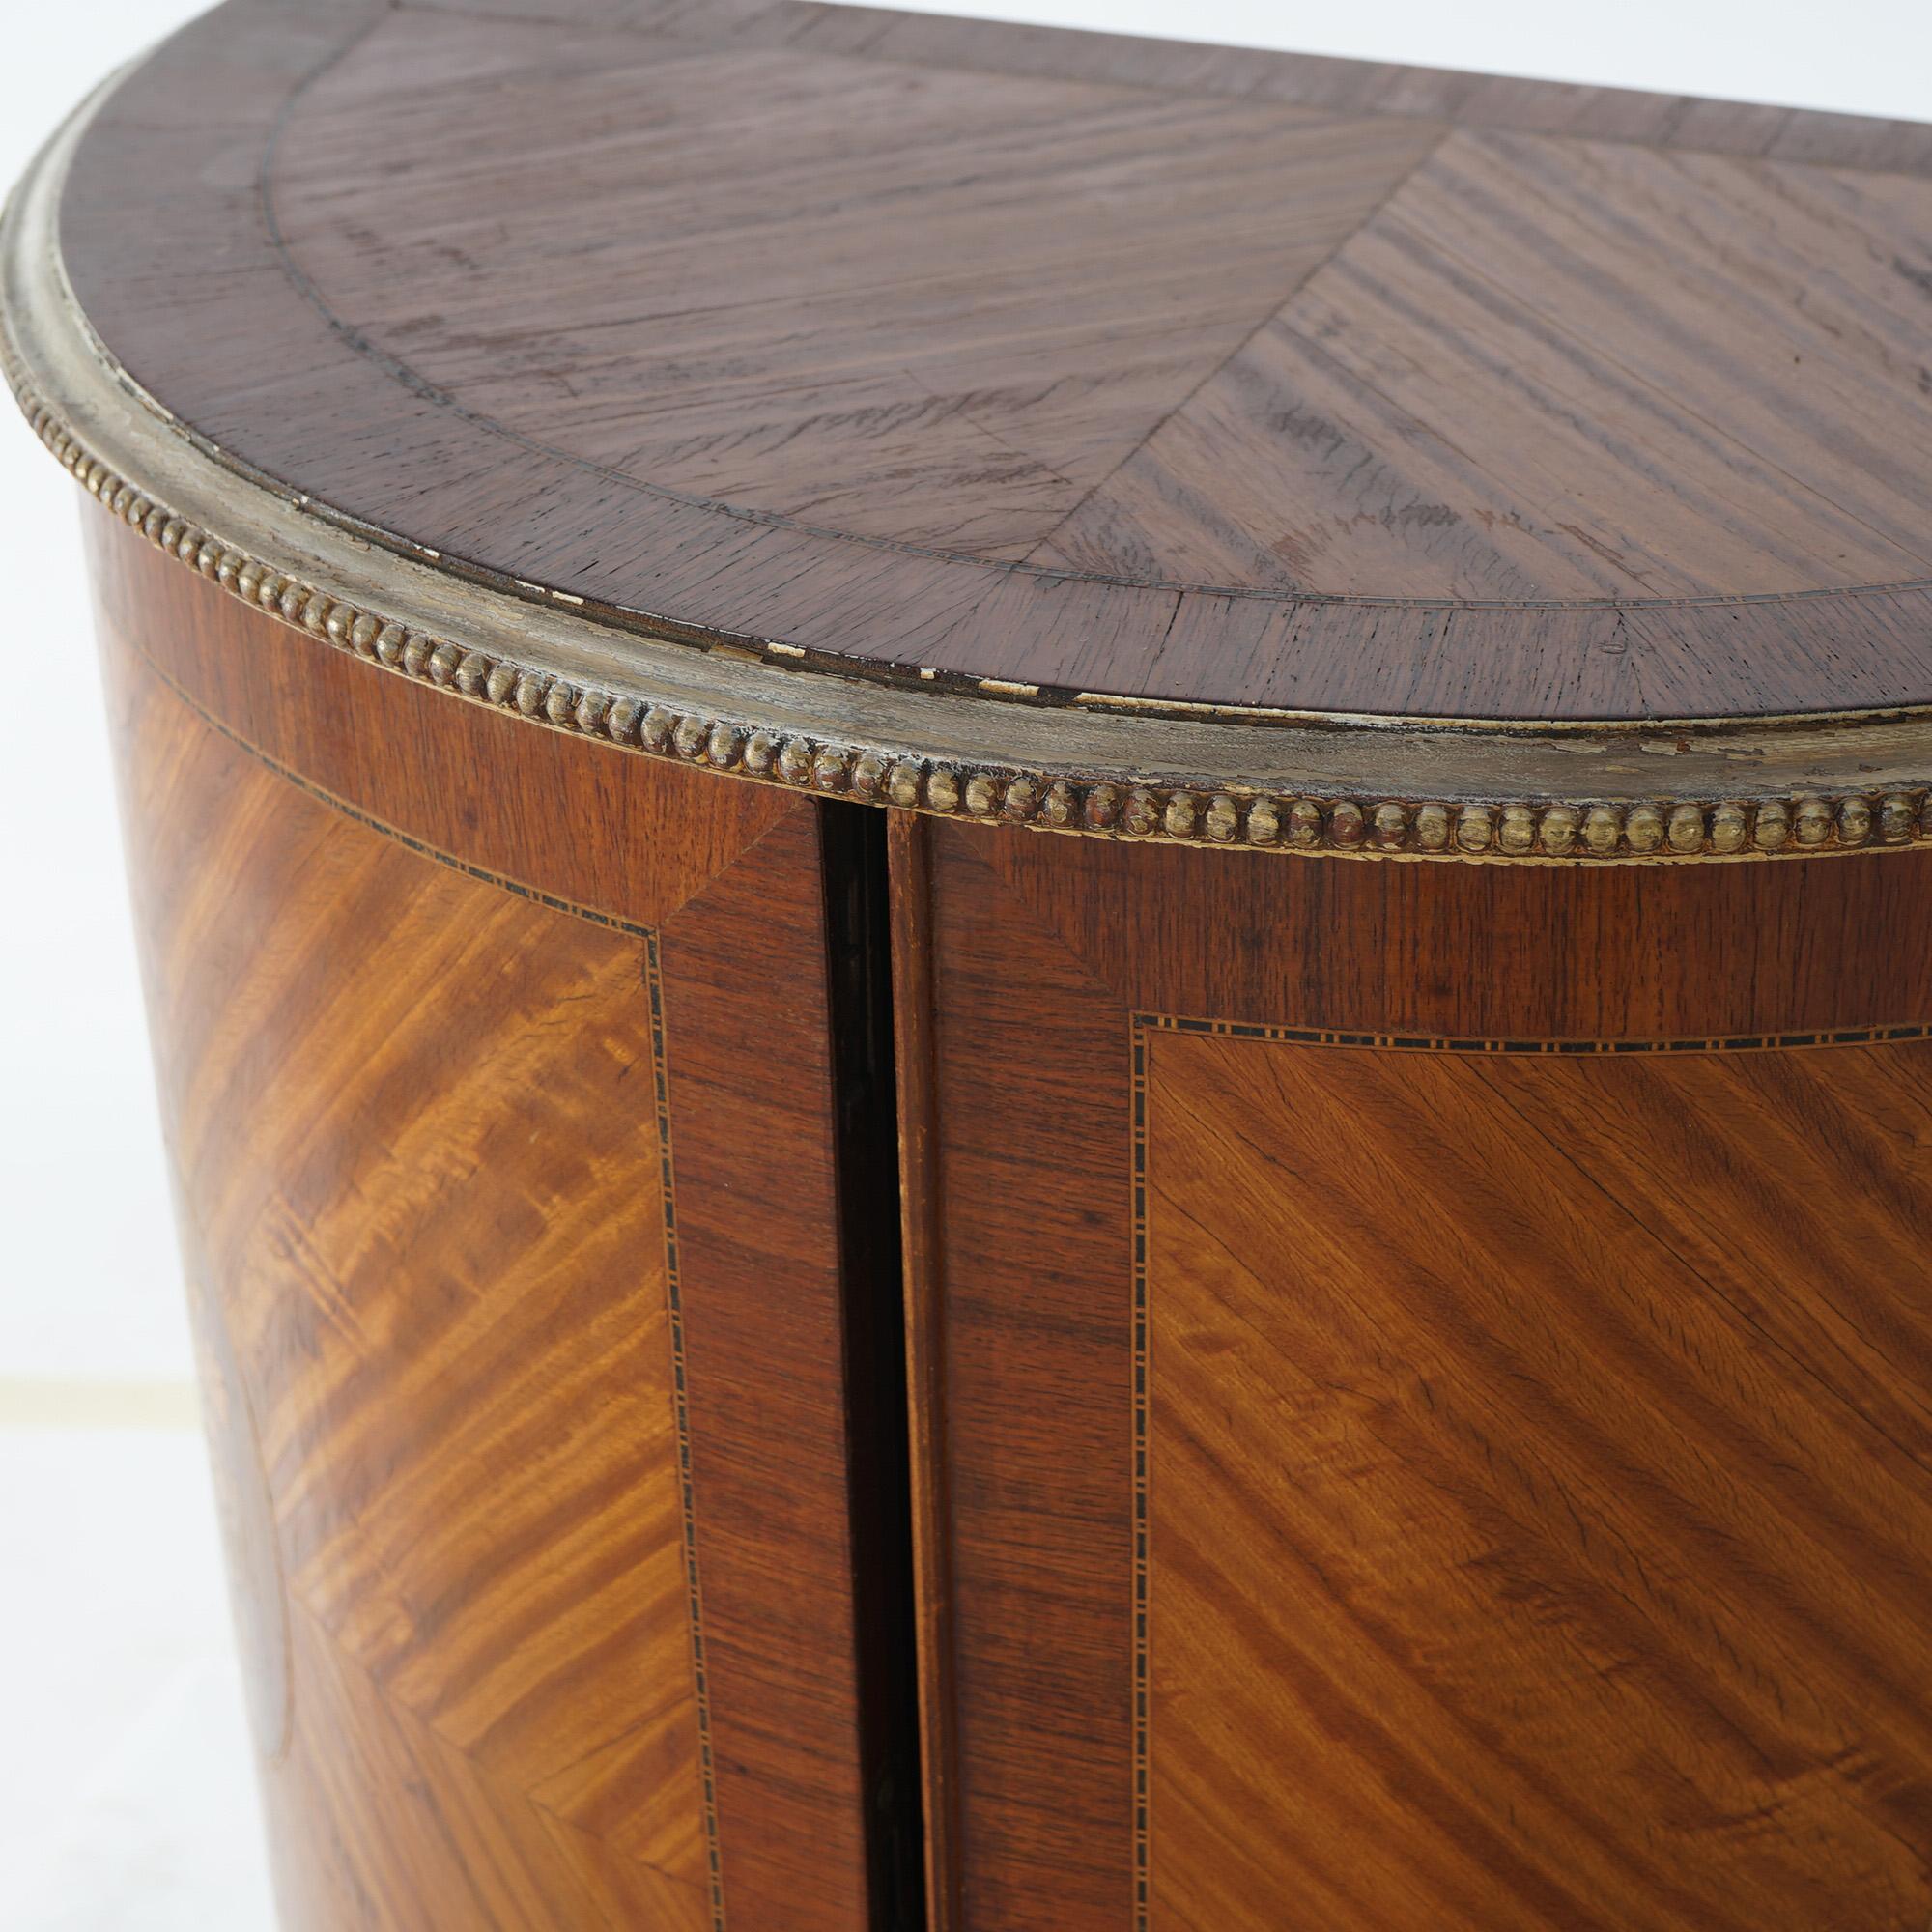 Two Antique Antique French Satinwood Inlaid Marquetry Demilune Side Tables C1920 For Sale 1